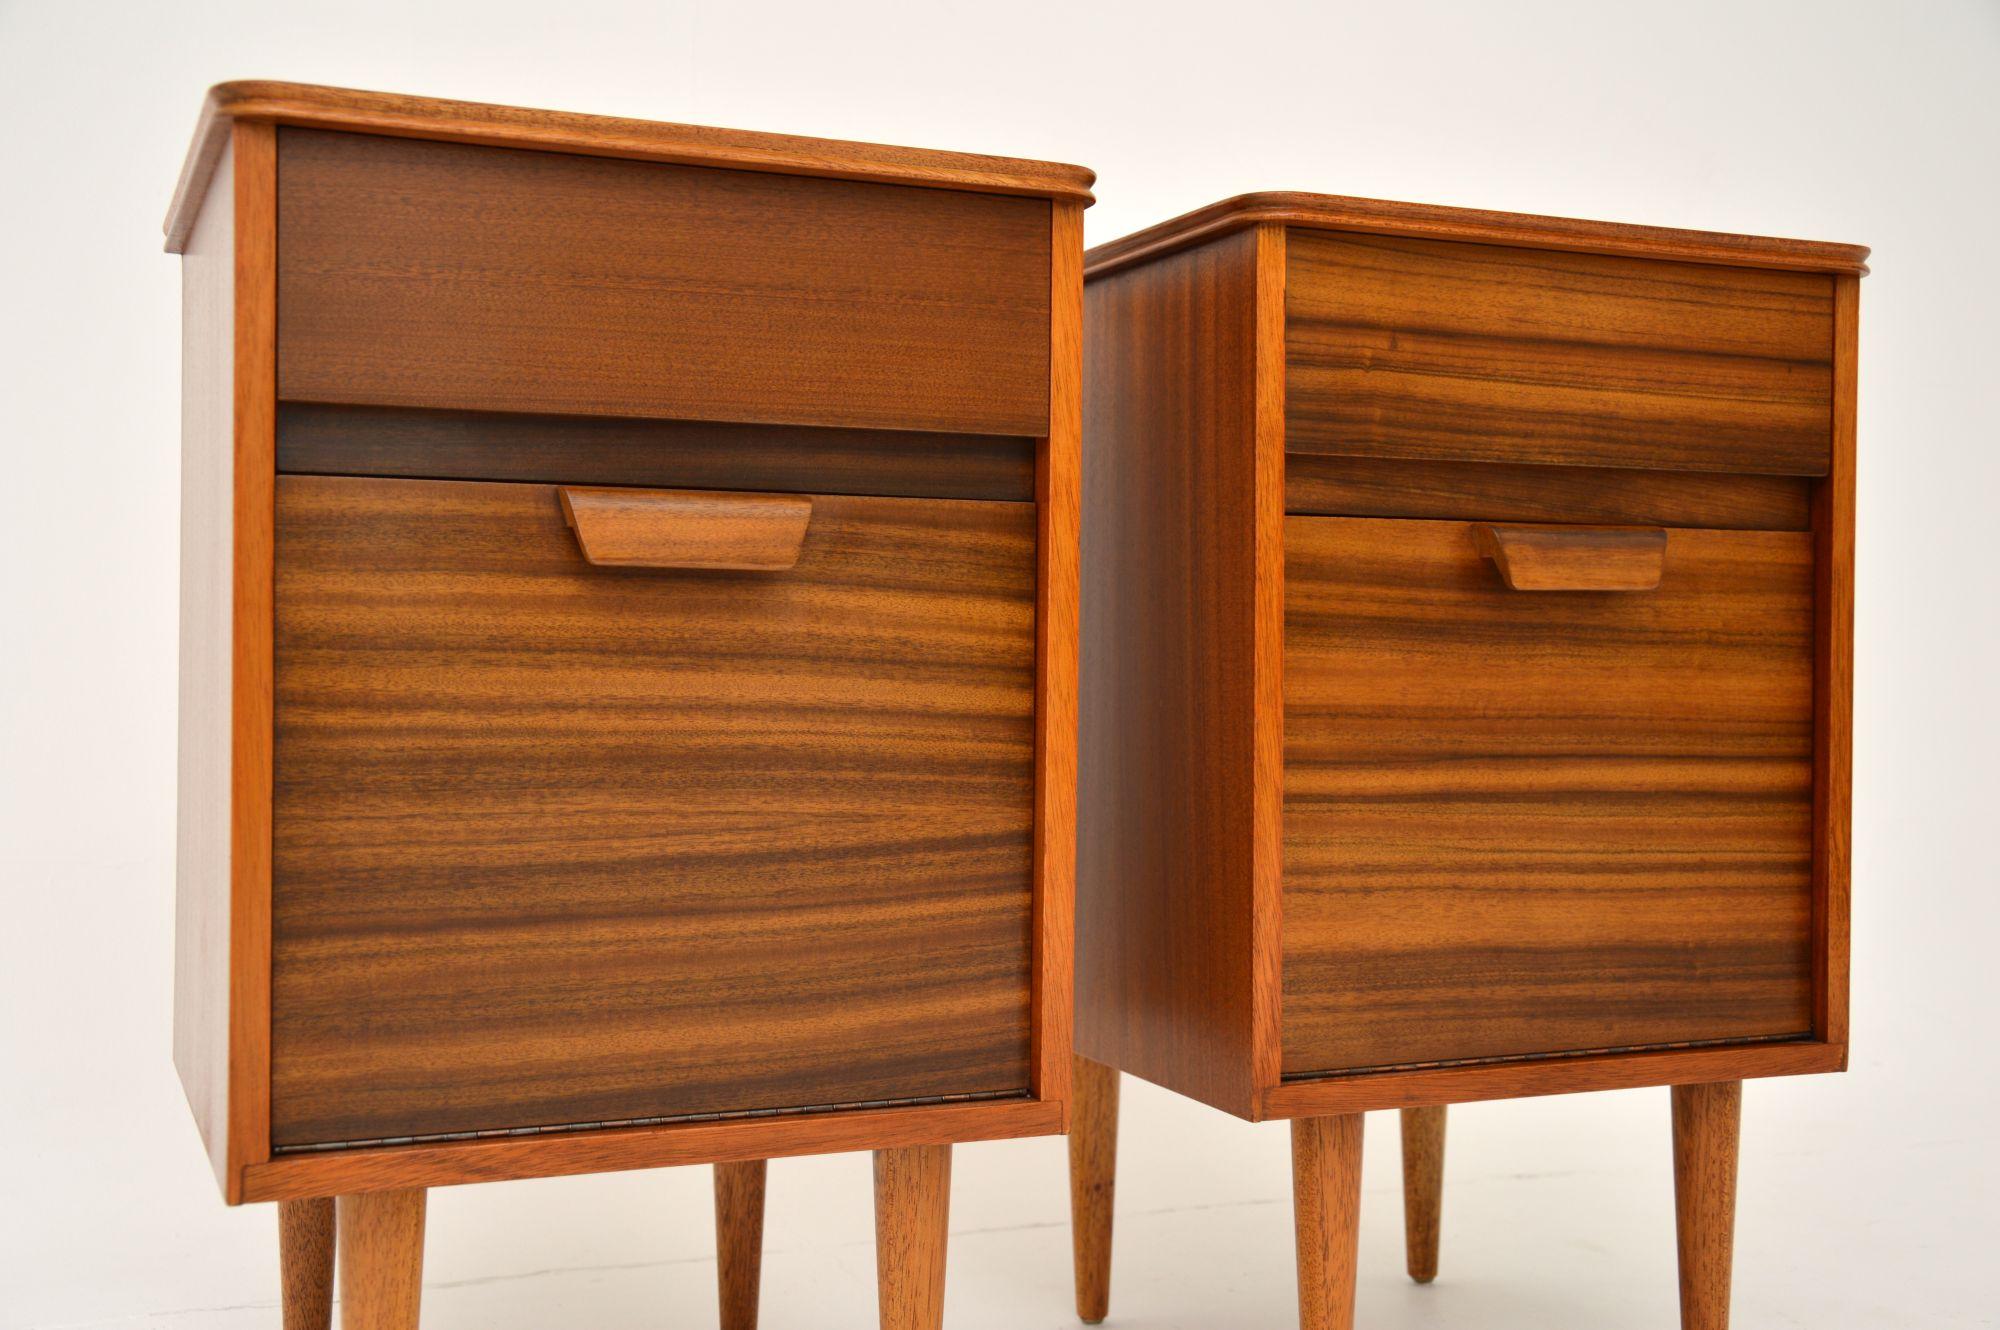 English 1960's Pair of Vintage Walnut Bedside Cabinets by Uniflex